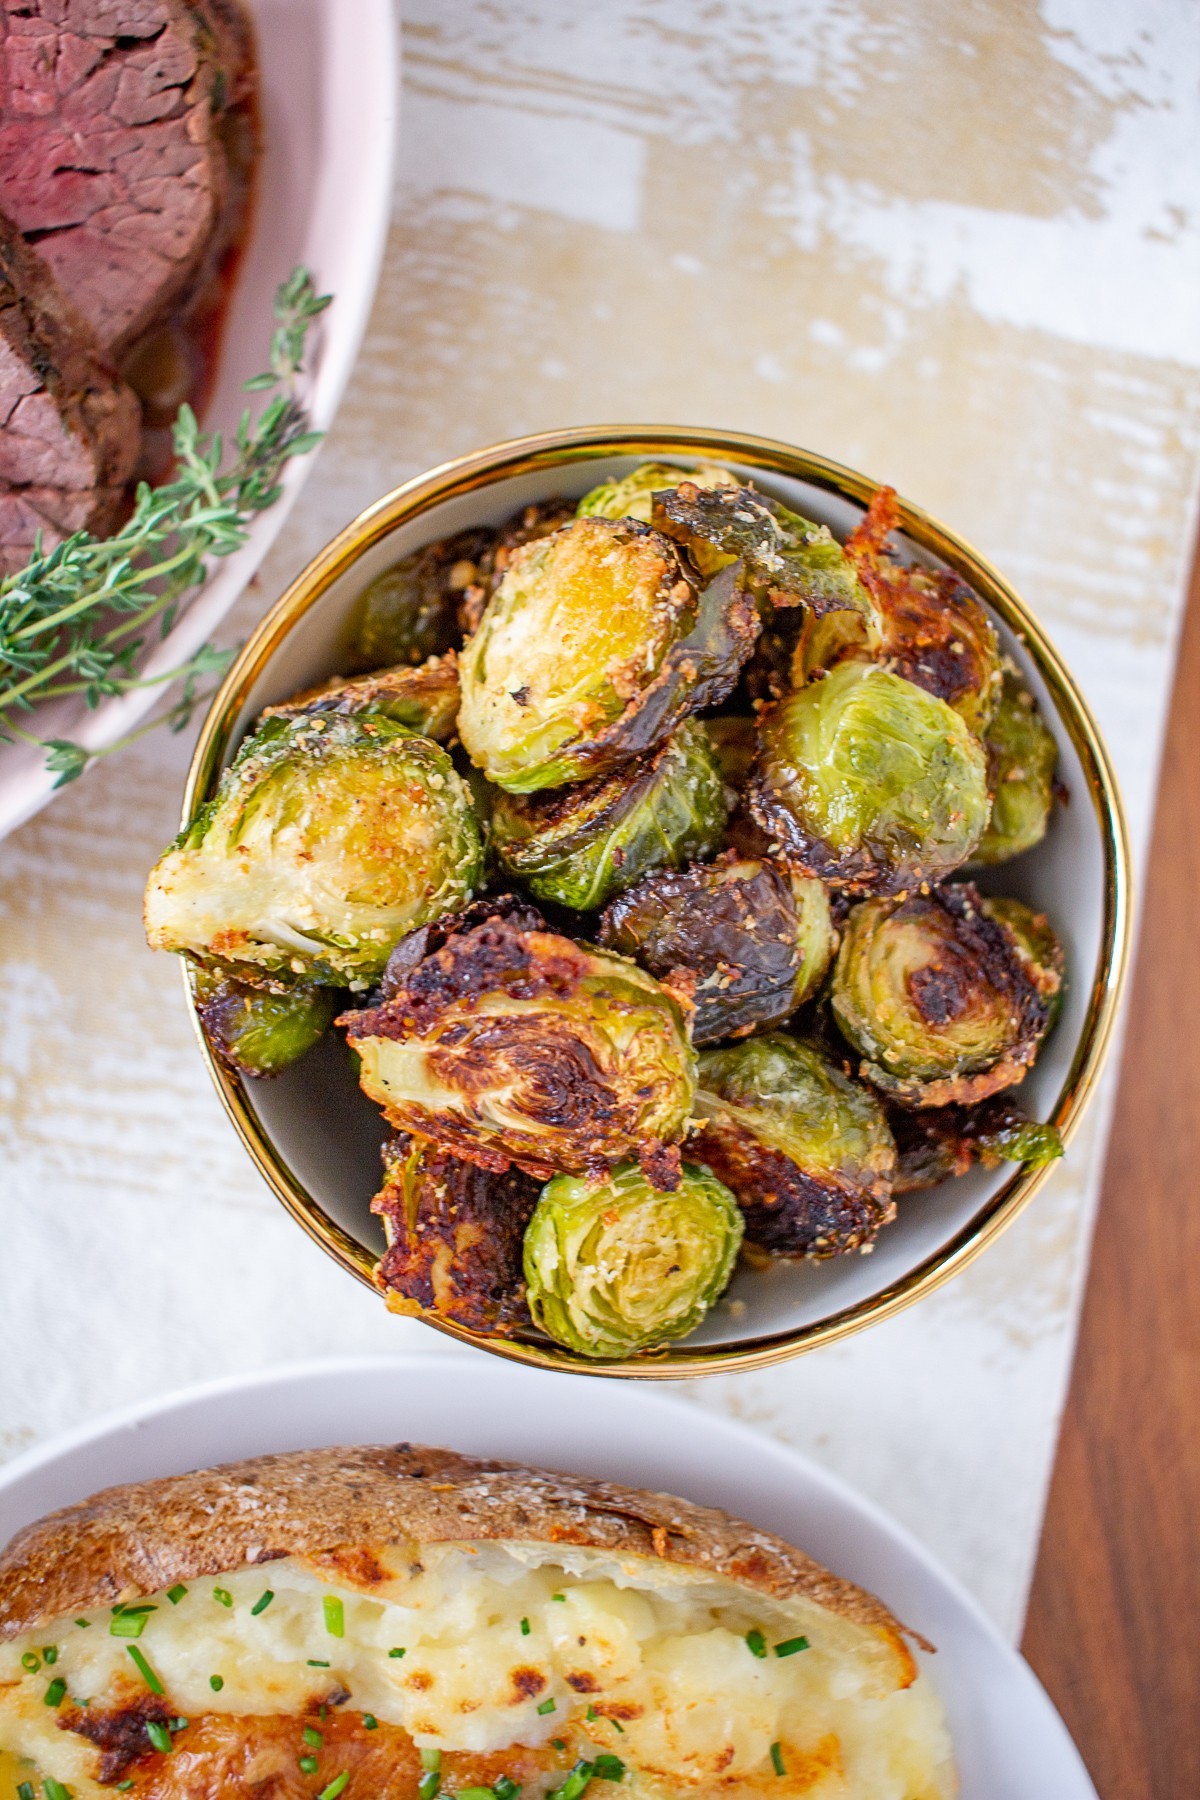 Bowl of brussels sprouts